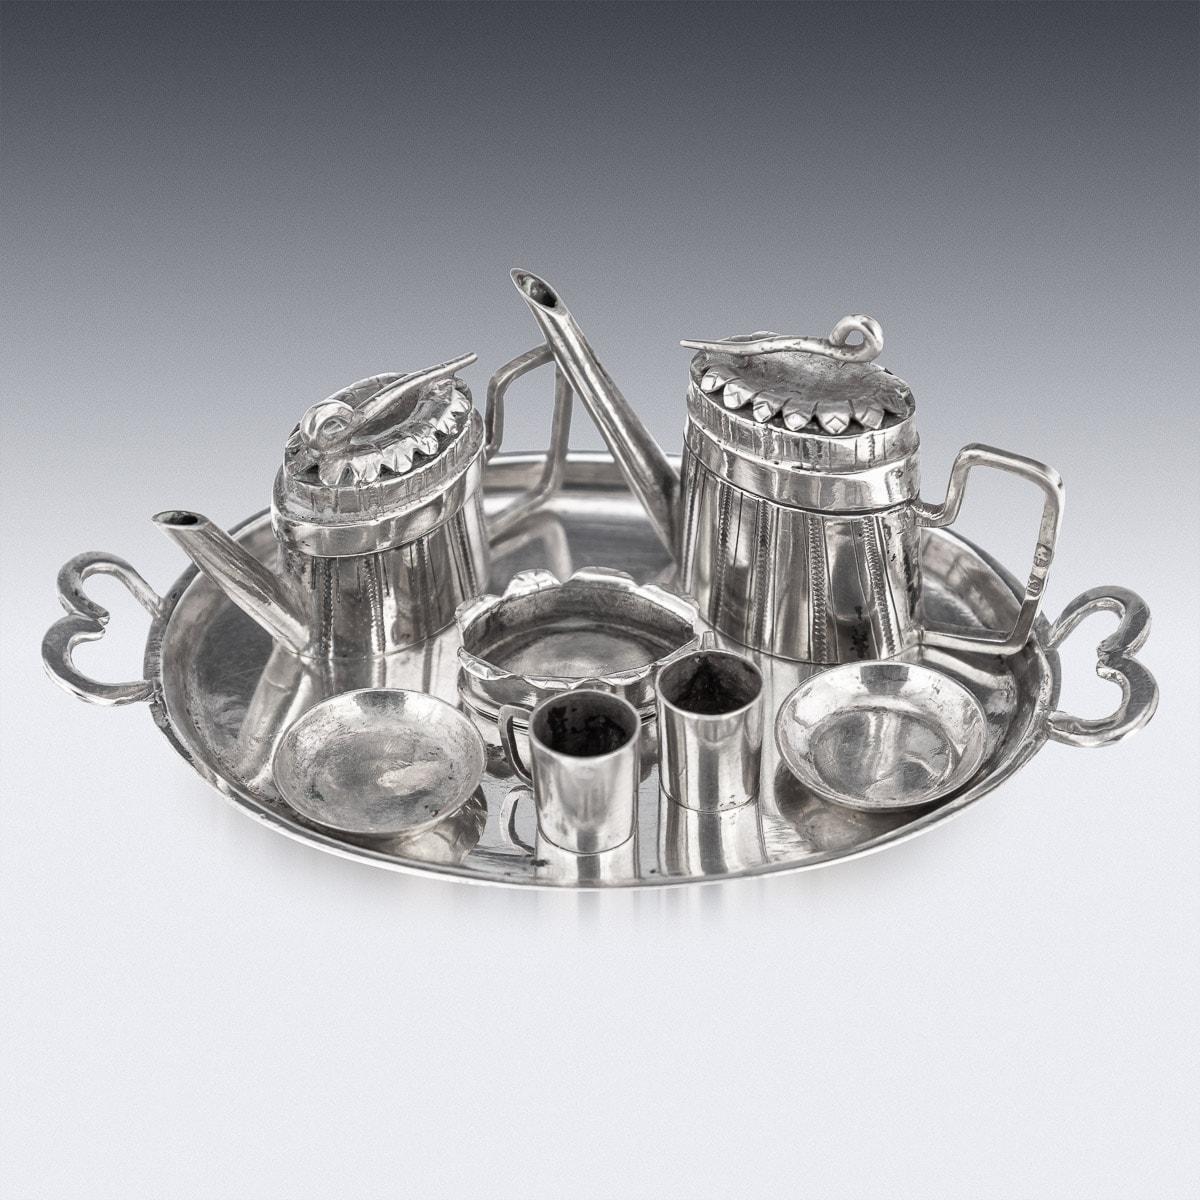 Antique mid-19th Century German miniature solid silver eight piece tea & coffee service, comprising of a coffee pot, tea pot, sugar bowl and two cups with saucers and a serving tray. A very rare set used to decorate a table in a doll house, comes in